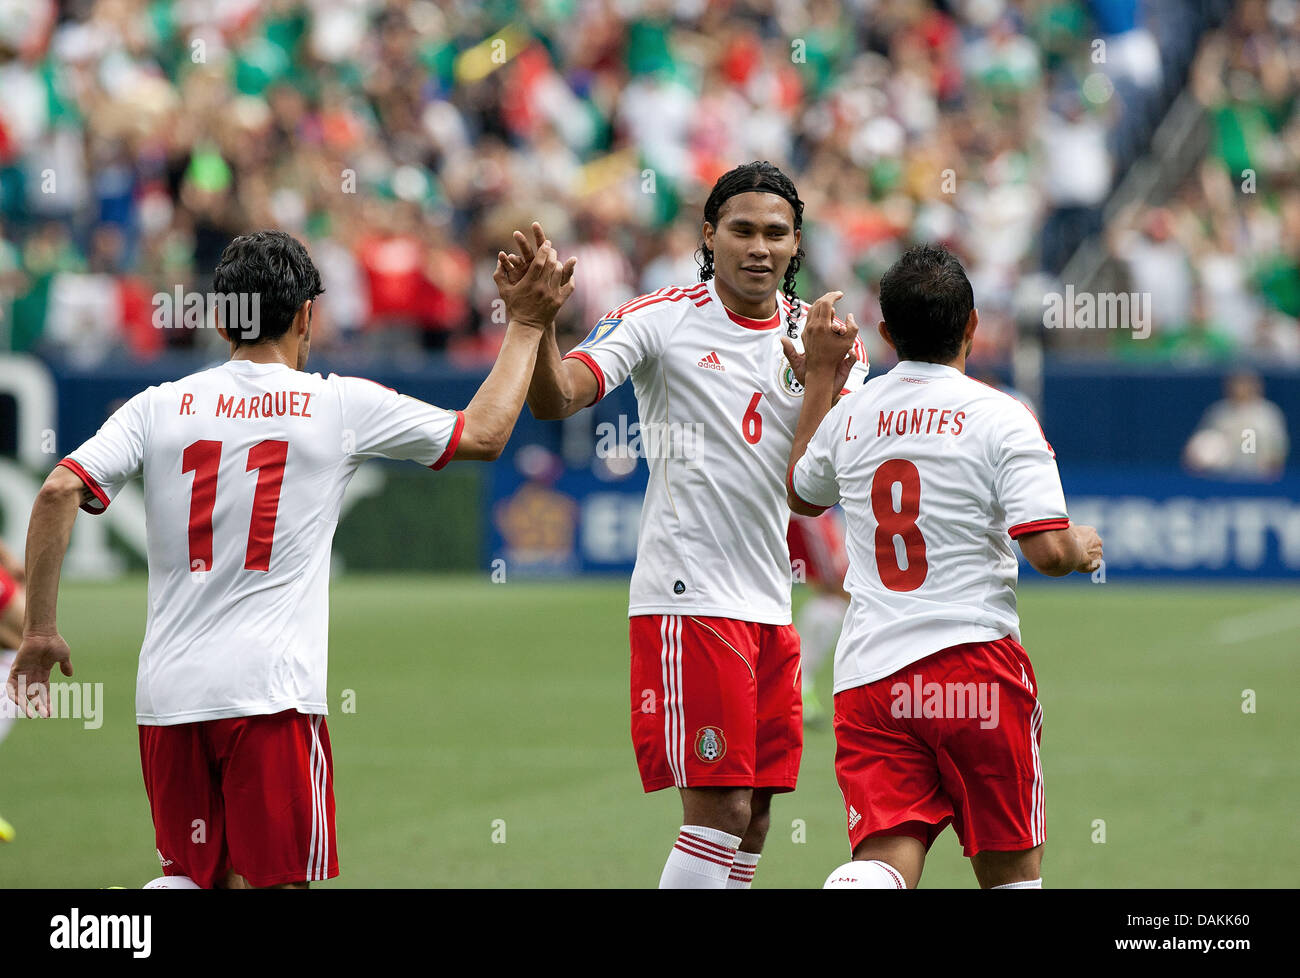 July 14, 2013 - Denver, Colorado, U.S - Mexico's CARLOS PENA, gives high fives to team mates after team mate MARCO FABIAN scores the first goal of the game during the 1st. half at Sports Authority Field at Mile High Sunday afternoon. Mexico defeats Martinique 3-1. (Credit Image: © Hector Acevedo/ZUMAPRESS.com) Stock Photo